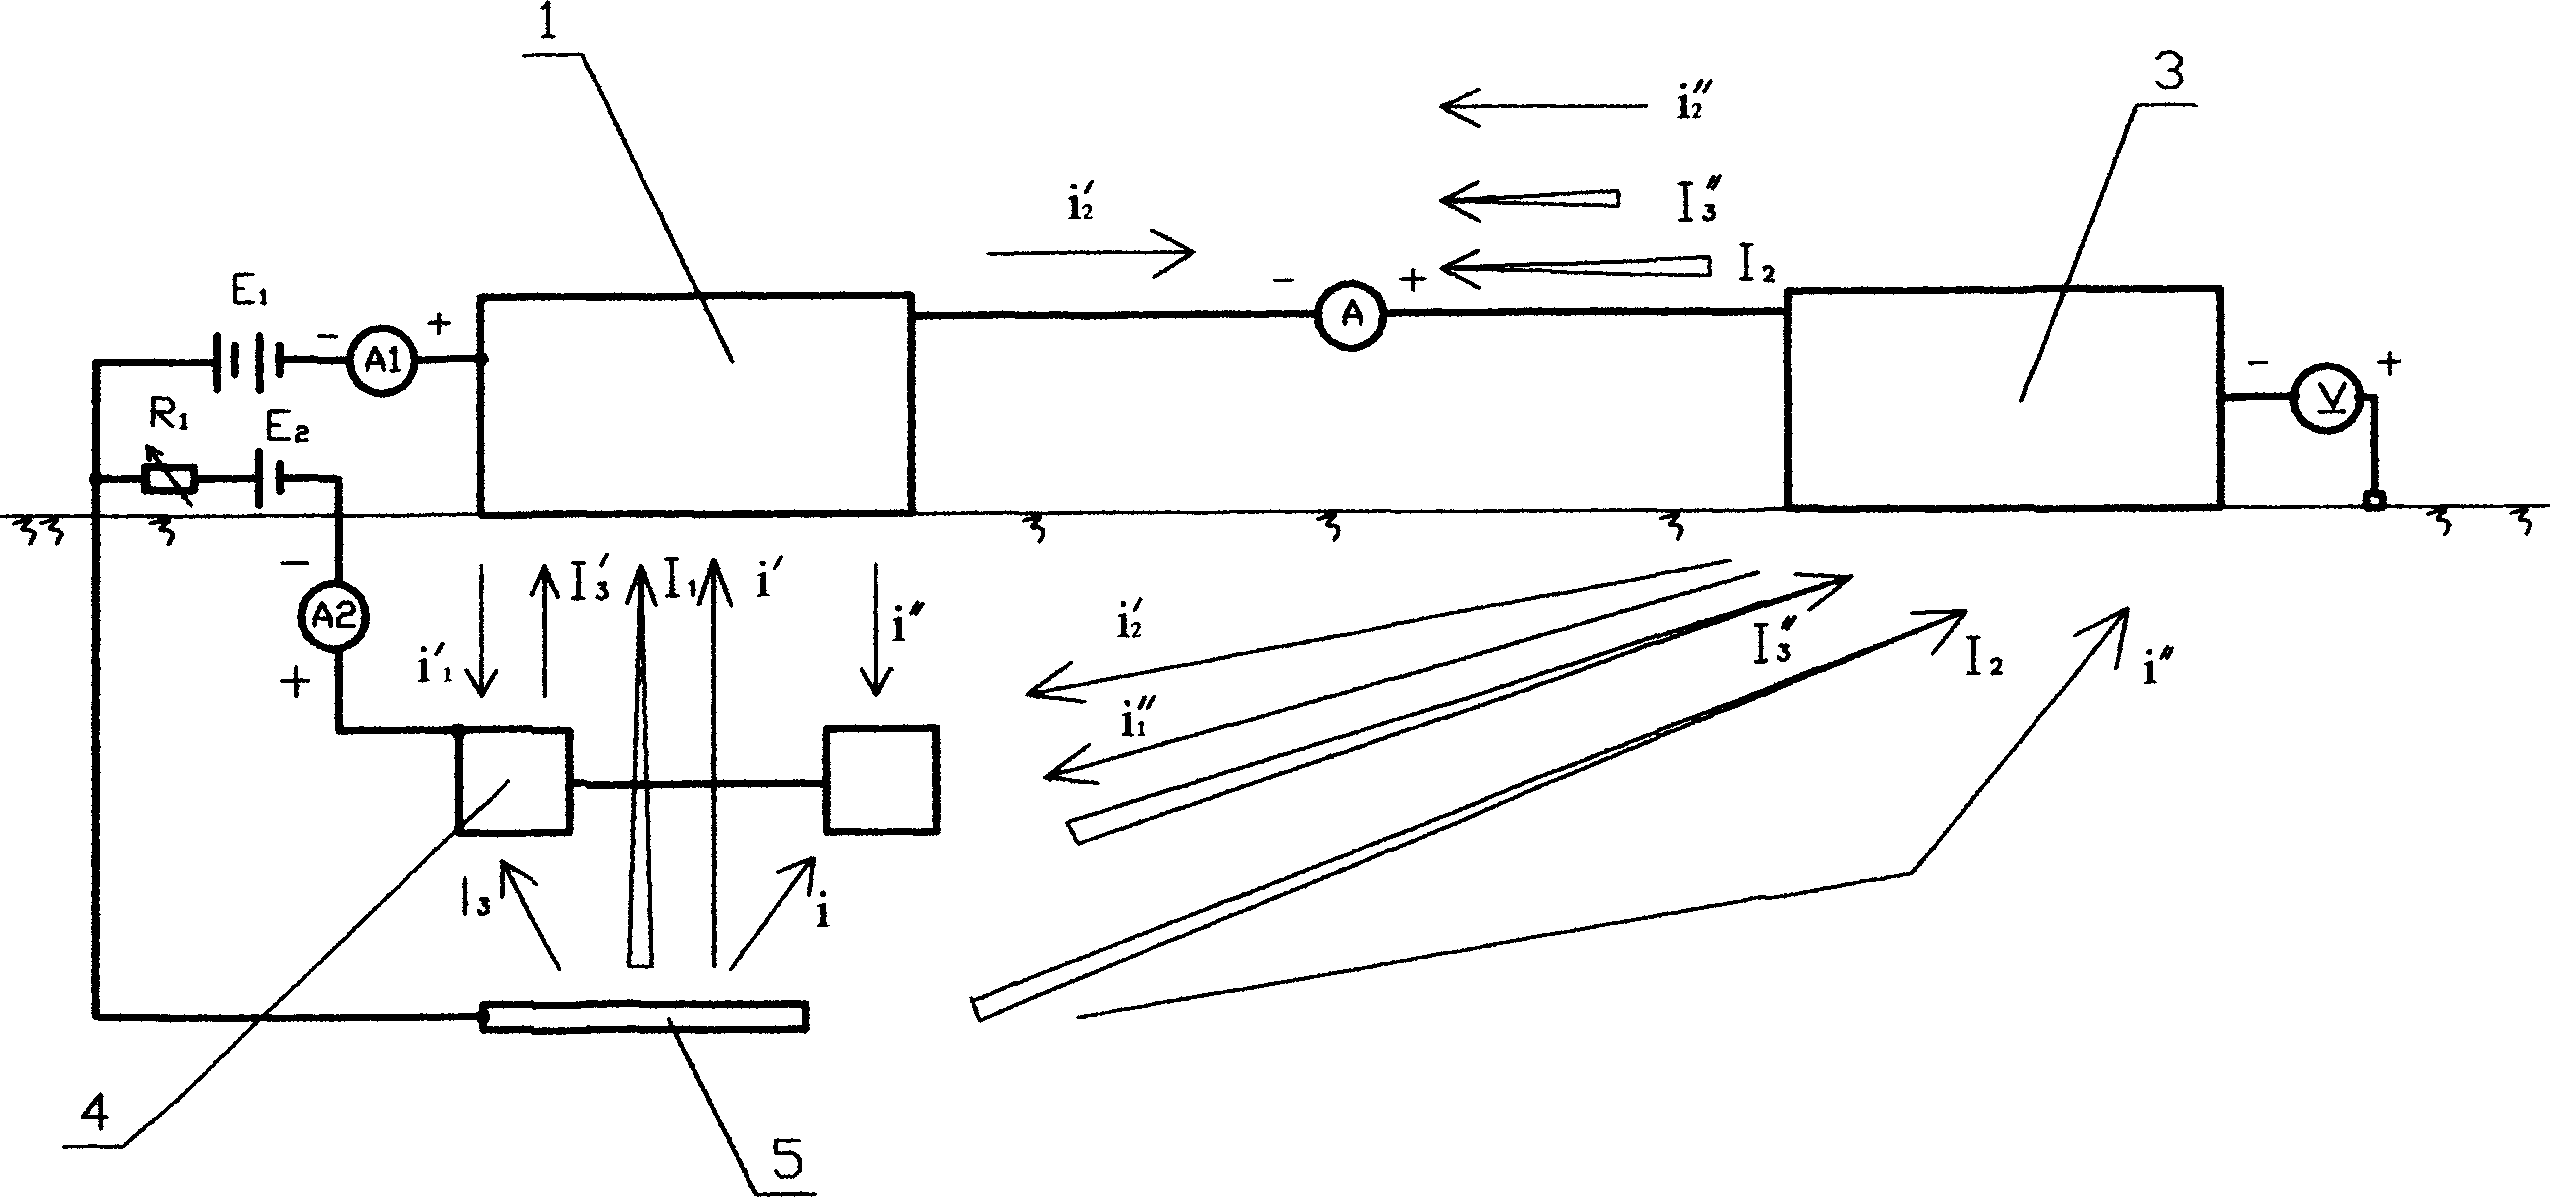 Method for elimination of interference damage of leaked stray current in ground from DC power supply